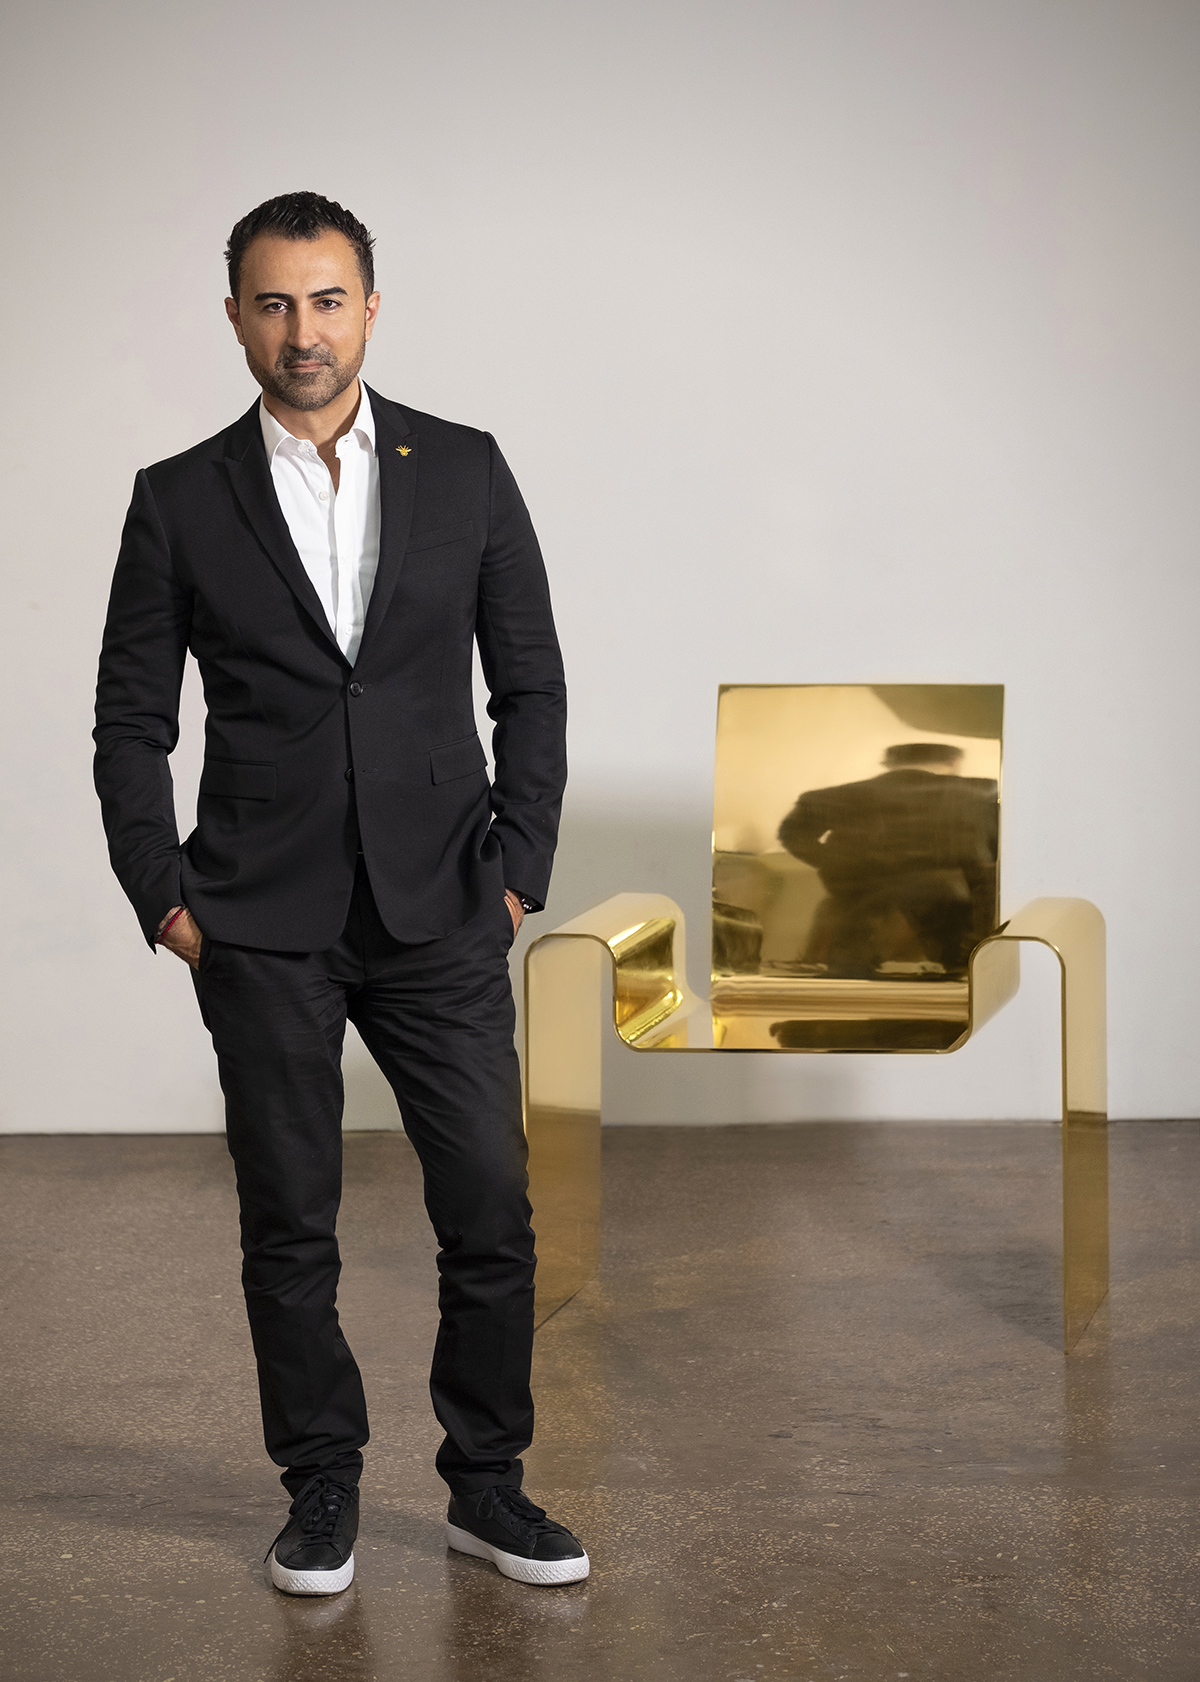 ICONIC Chair by Nabil Issa